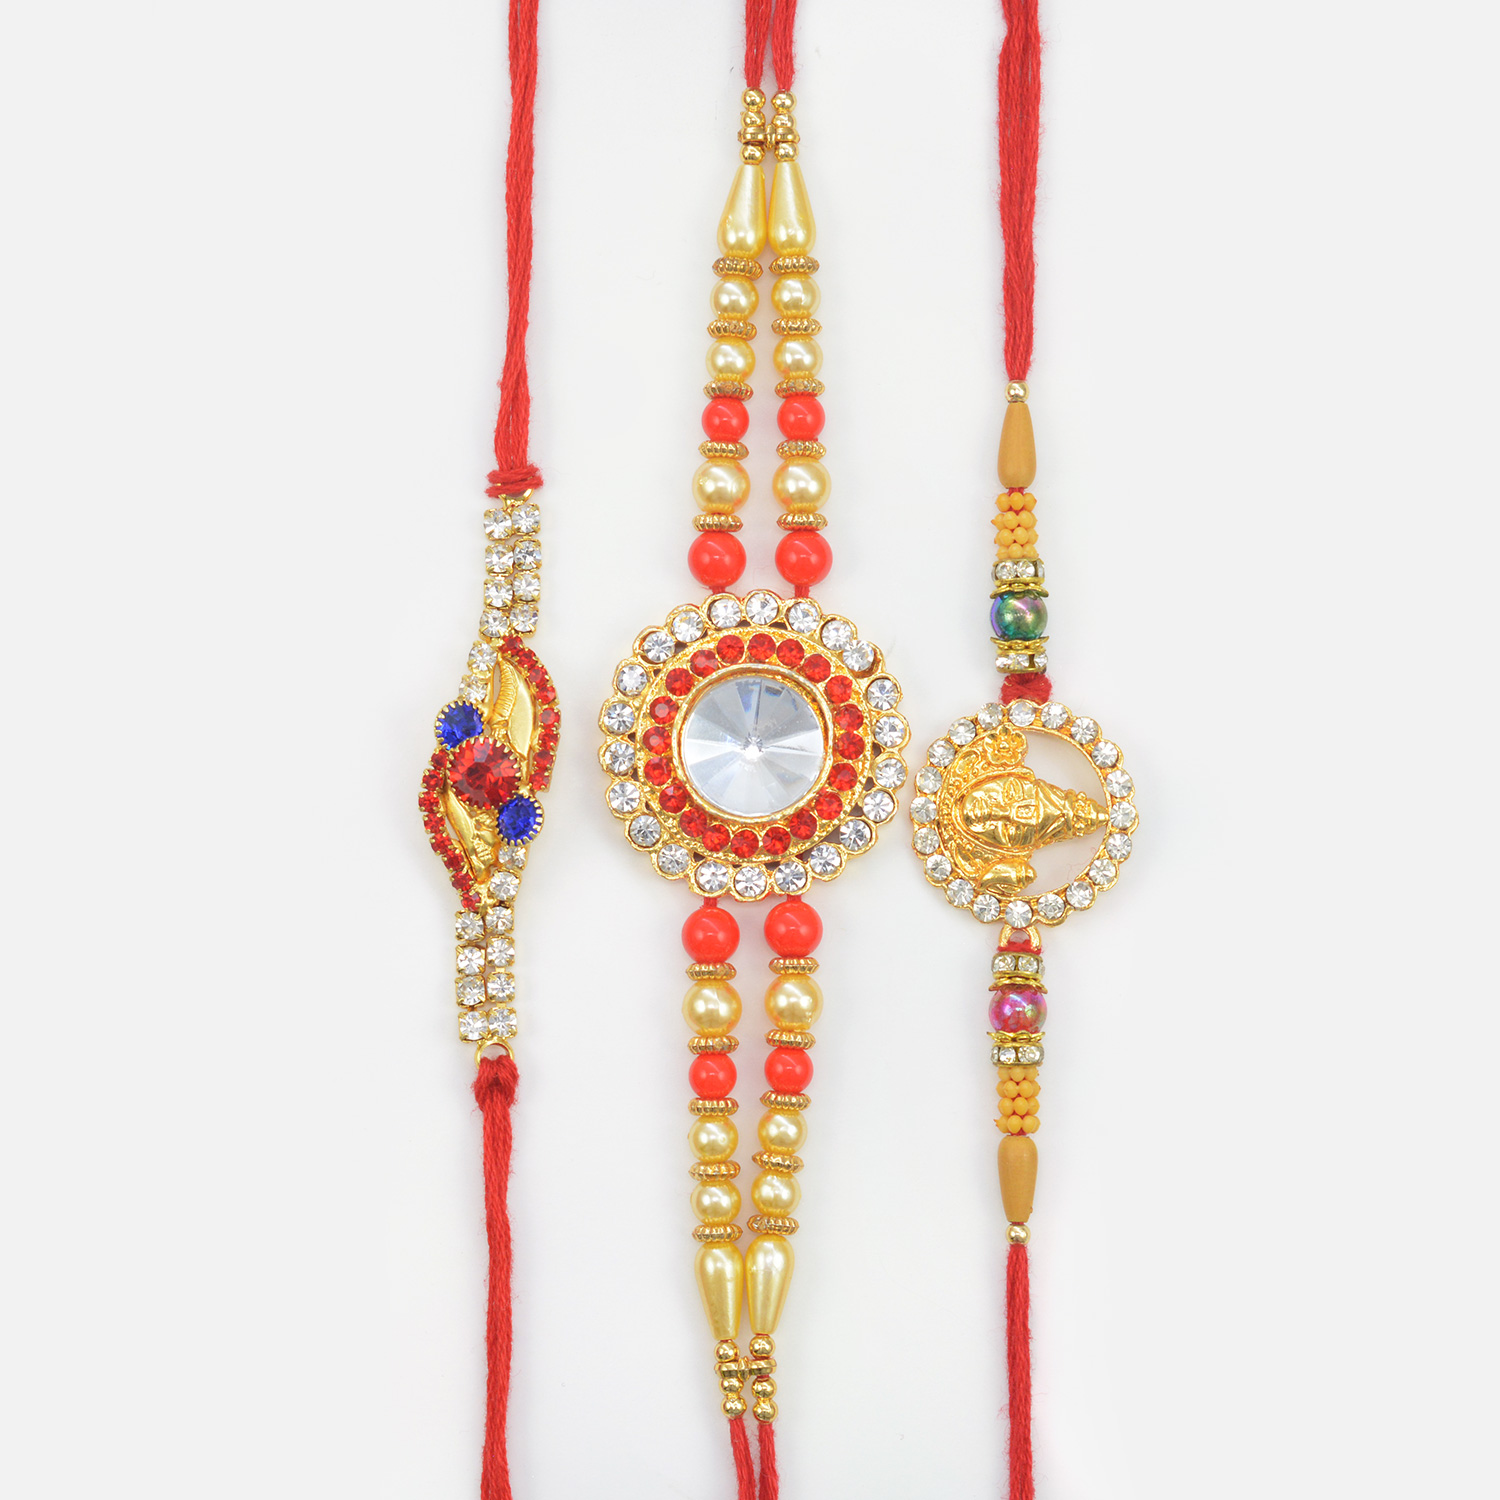 Big Diamond In Mid with Lord Shiva and New Pattern Rakhi Set of Awesome 3 Rakhis